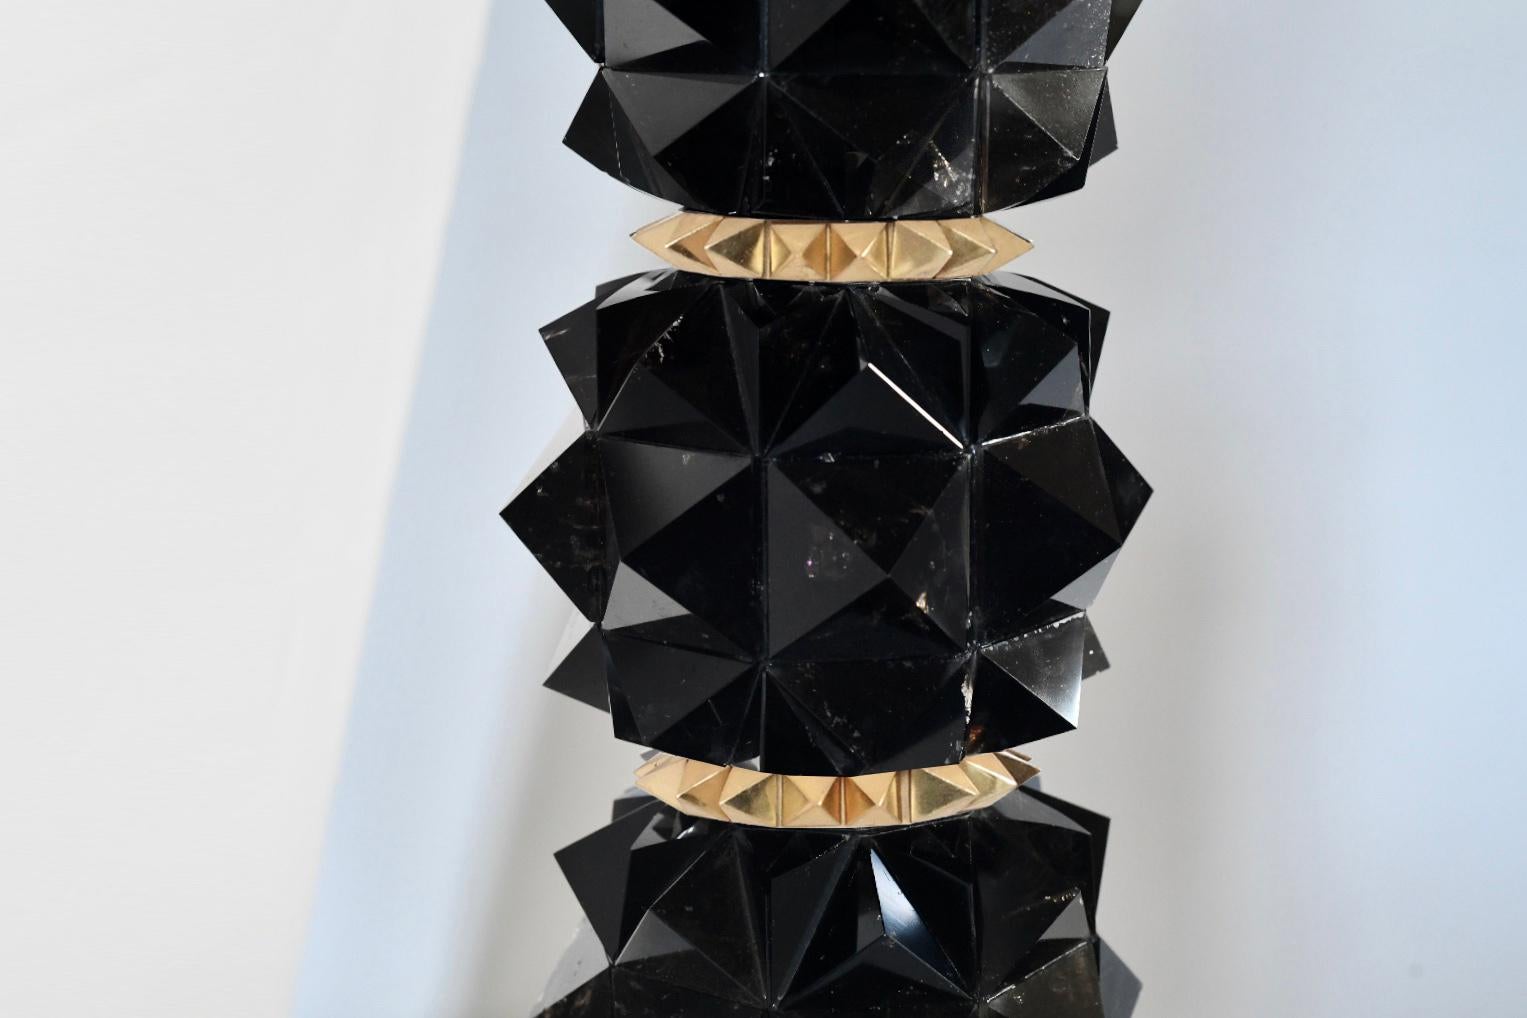 Pair of fine carved faceted dark rock crystal lamps with polished brass decoration. Created by Phoenix Gallery, NYC.
To the top of rock crystal: 16.5